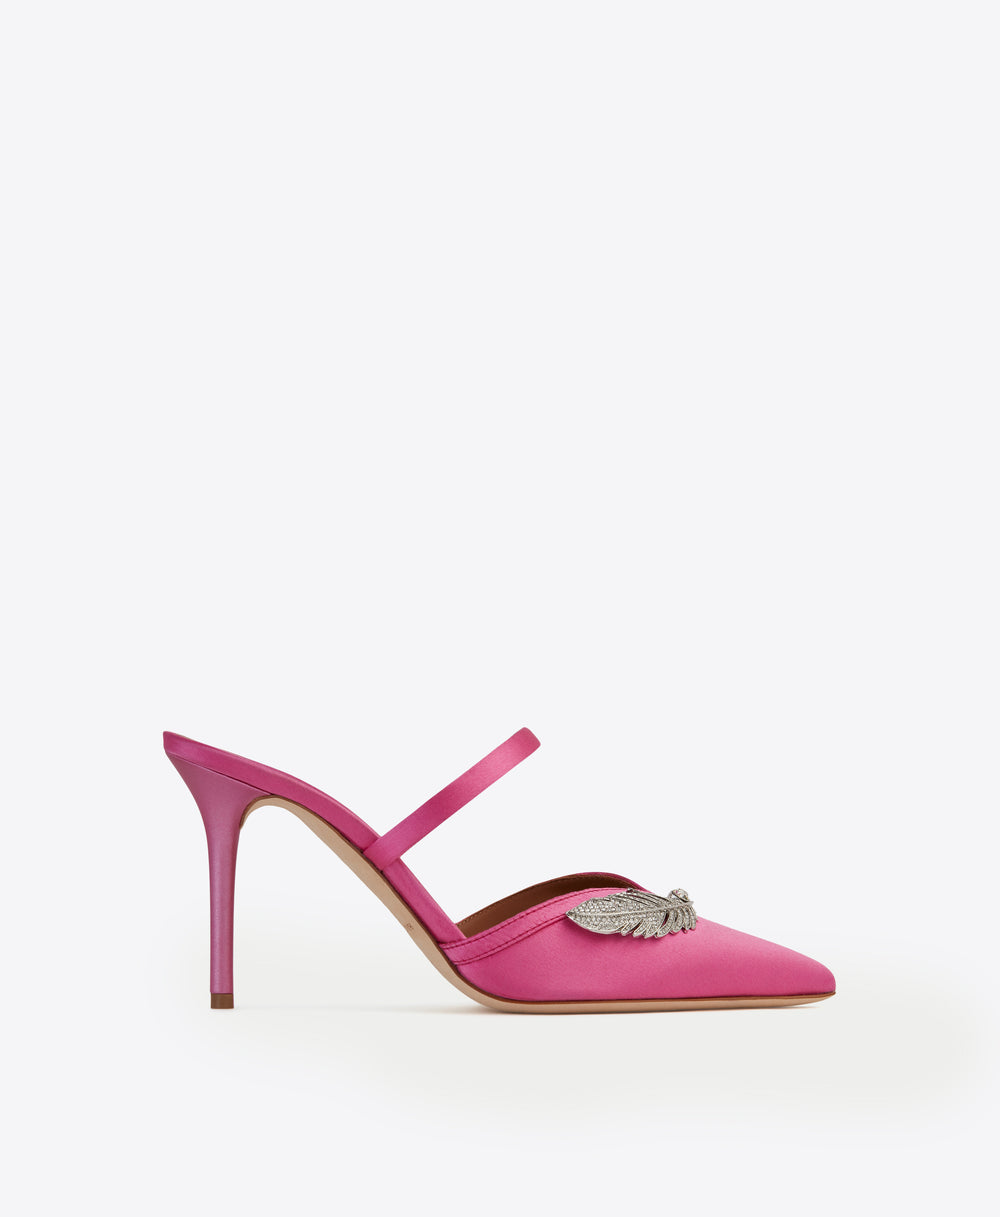 Women's Pink Satin Embellished Stiletto Mules Malone Souliers